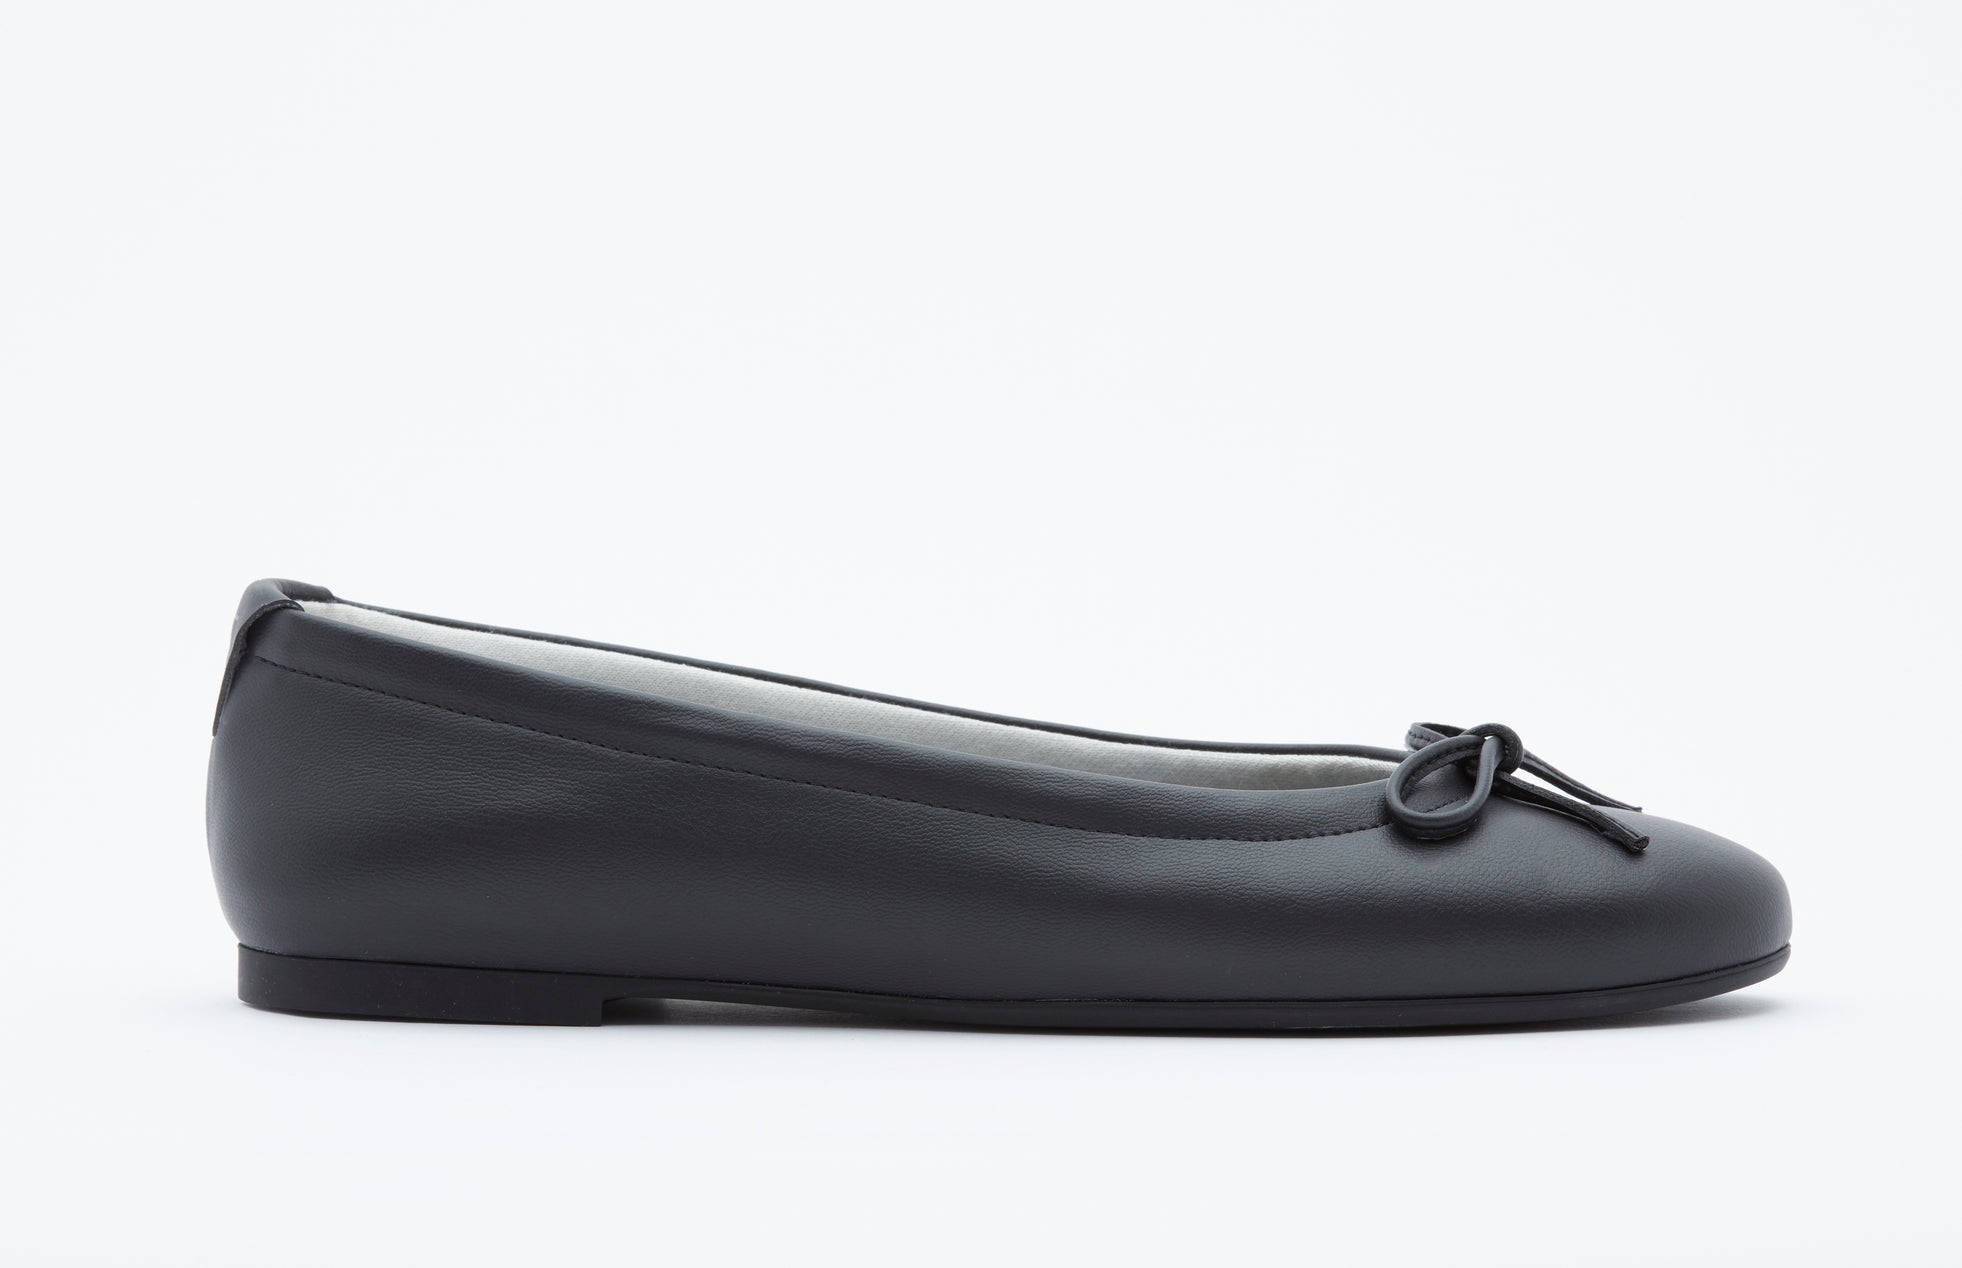 The Ballet Flat in Banbū Leather in Black image 8